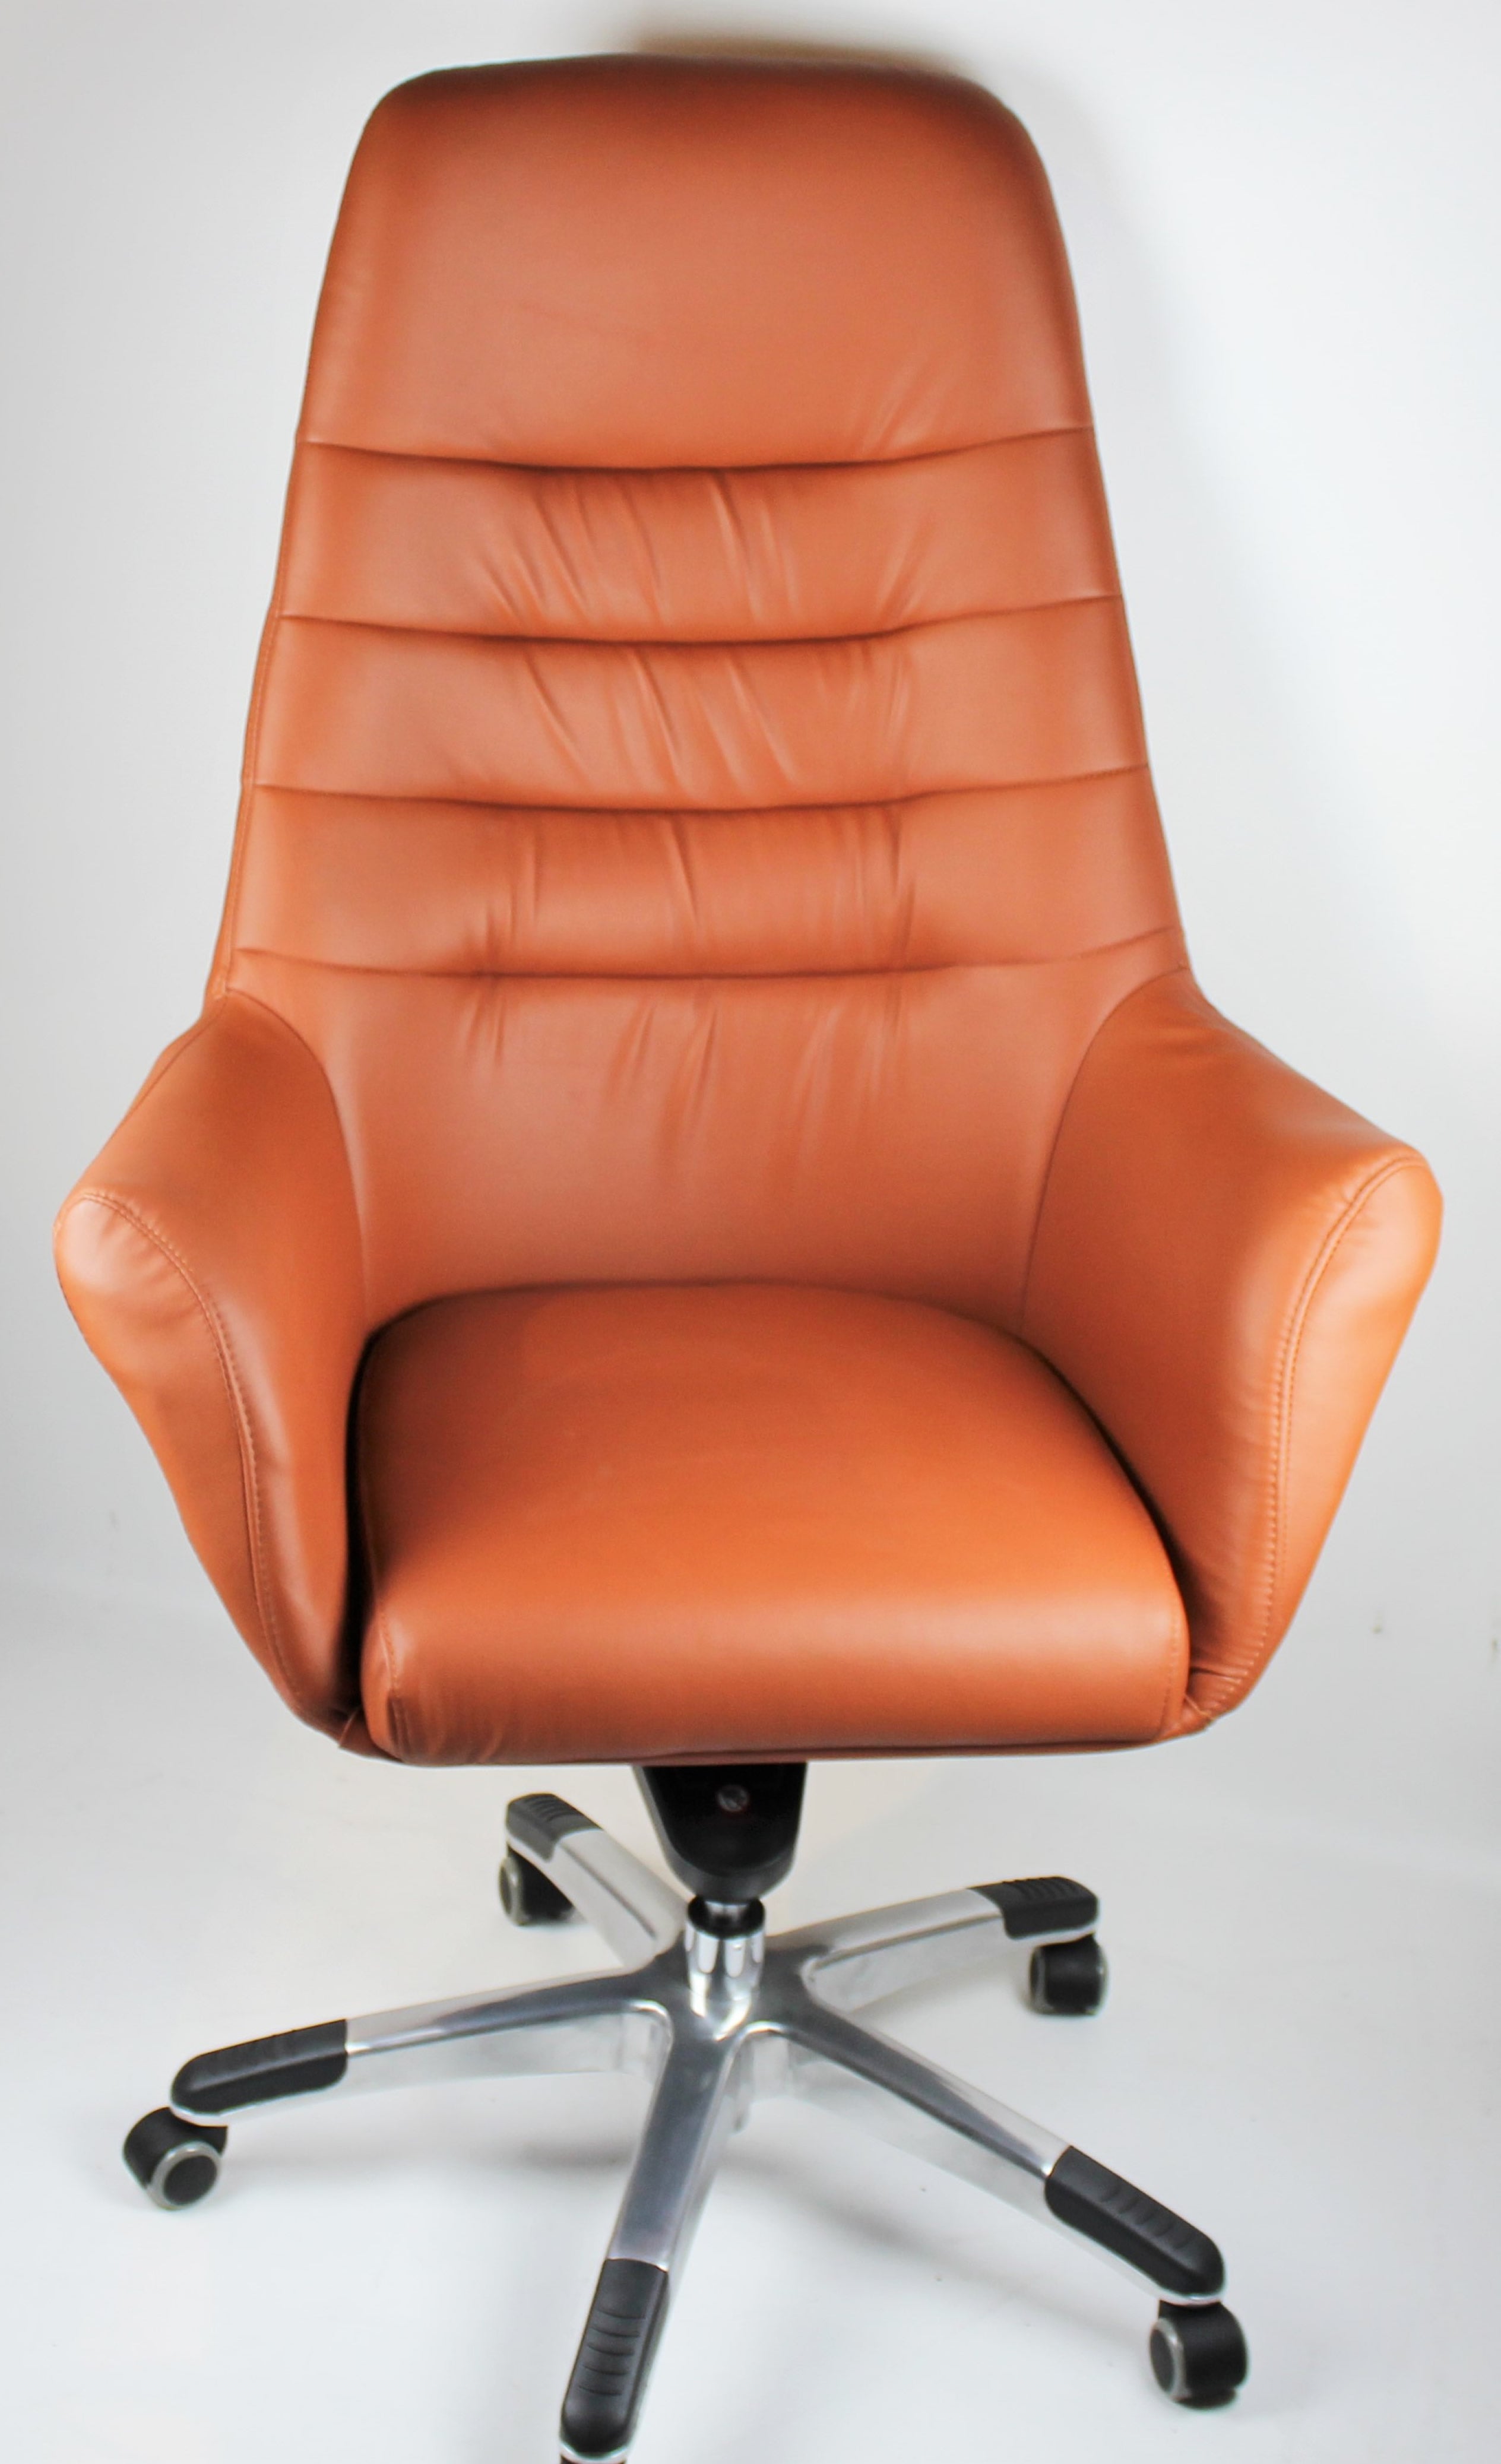 Office Chair In Tan With Swivel GRA-CHA-506A Near Me